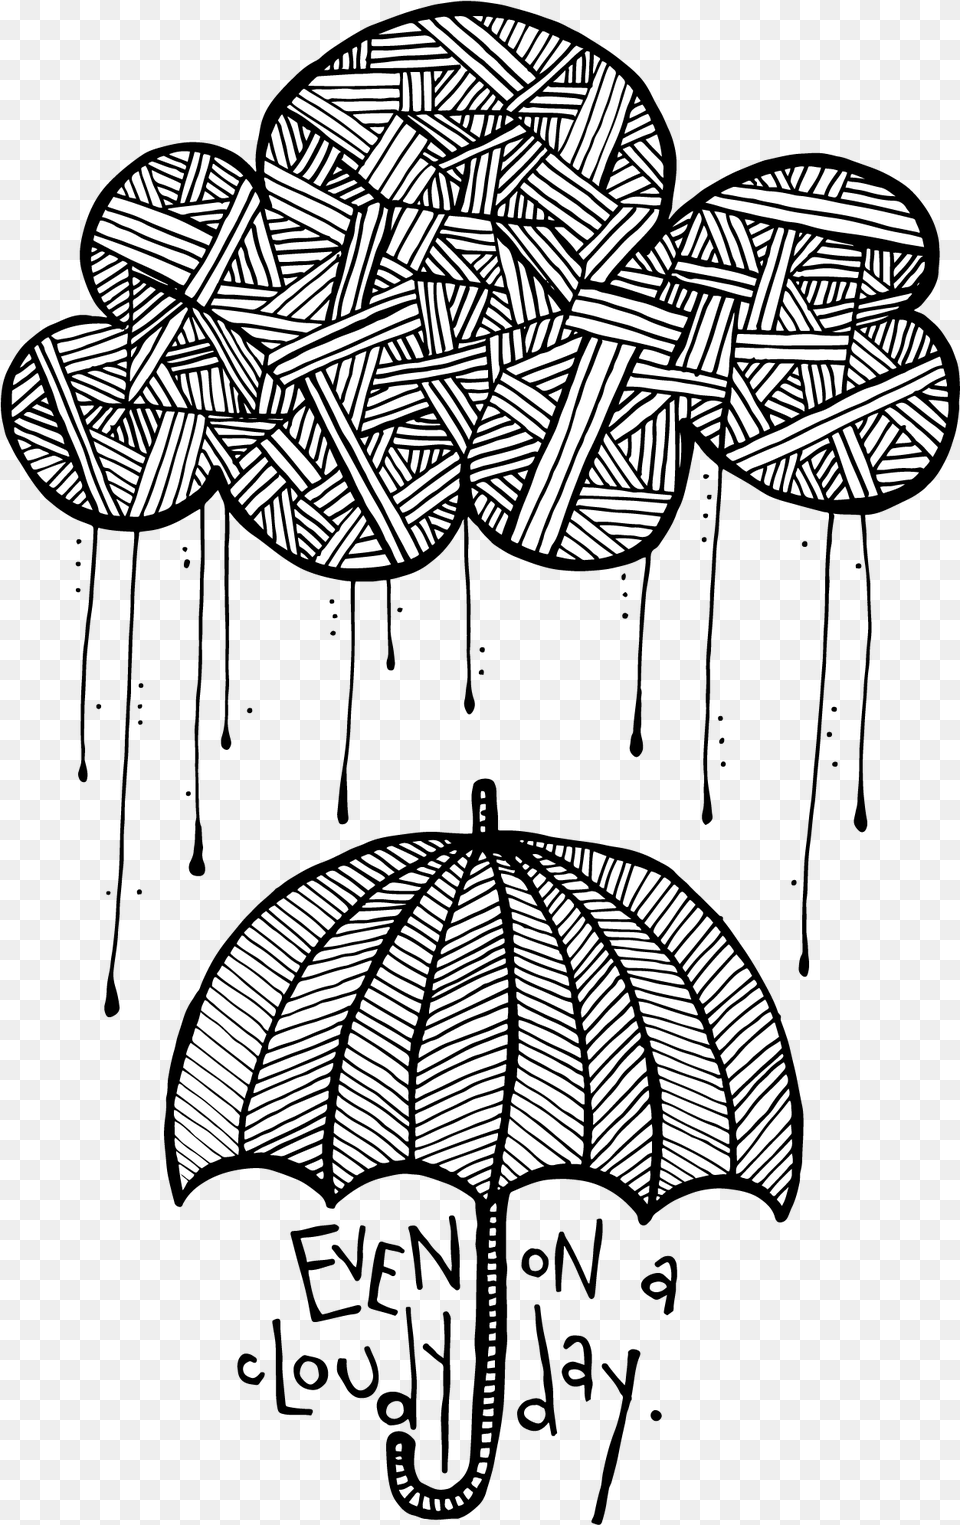 Even On A Cloudy Day Draw Cloudy Day, Art, Canopy, Umbrella, Drawing Free Png Download